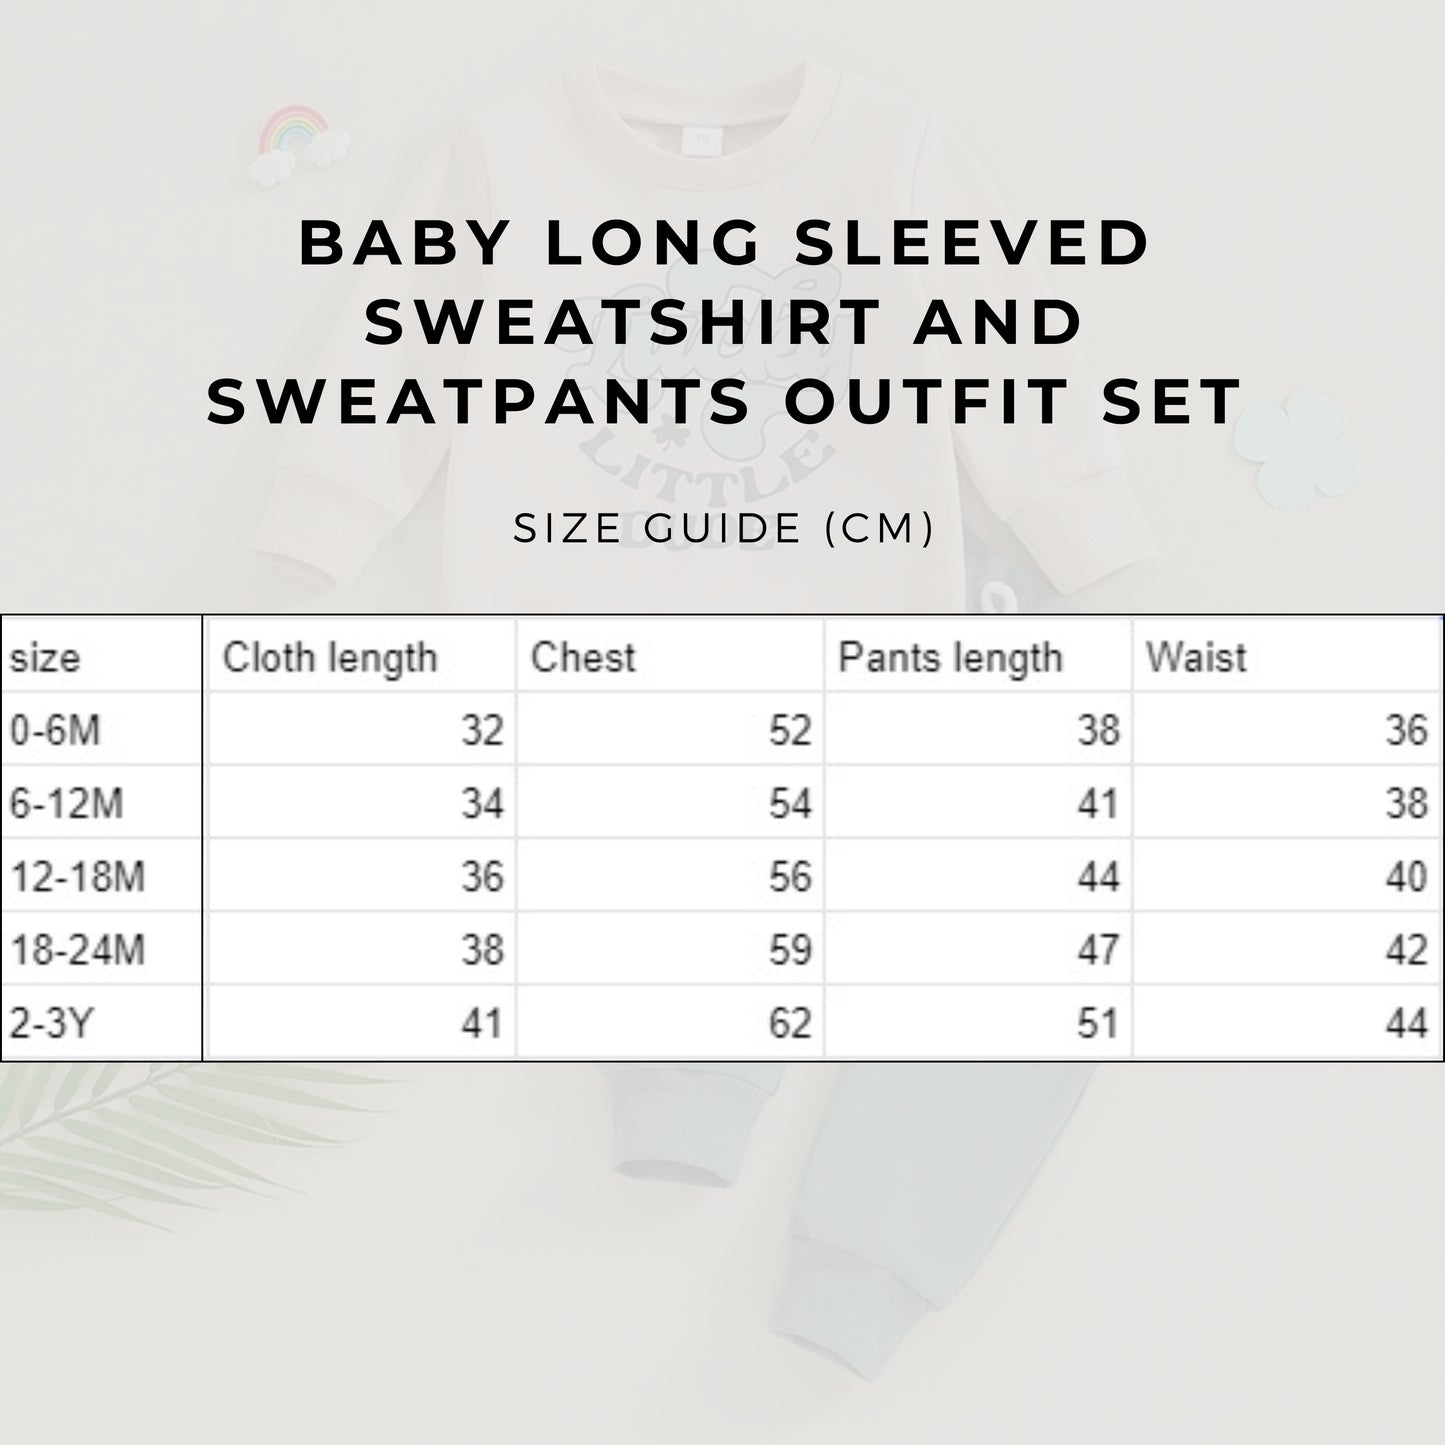 Baby Long Sleeved Sweatshirt and Sweatpants Outfit Set size